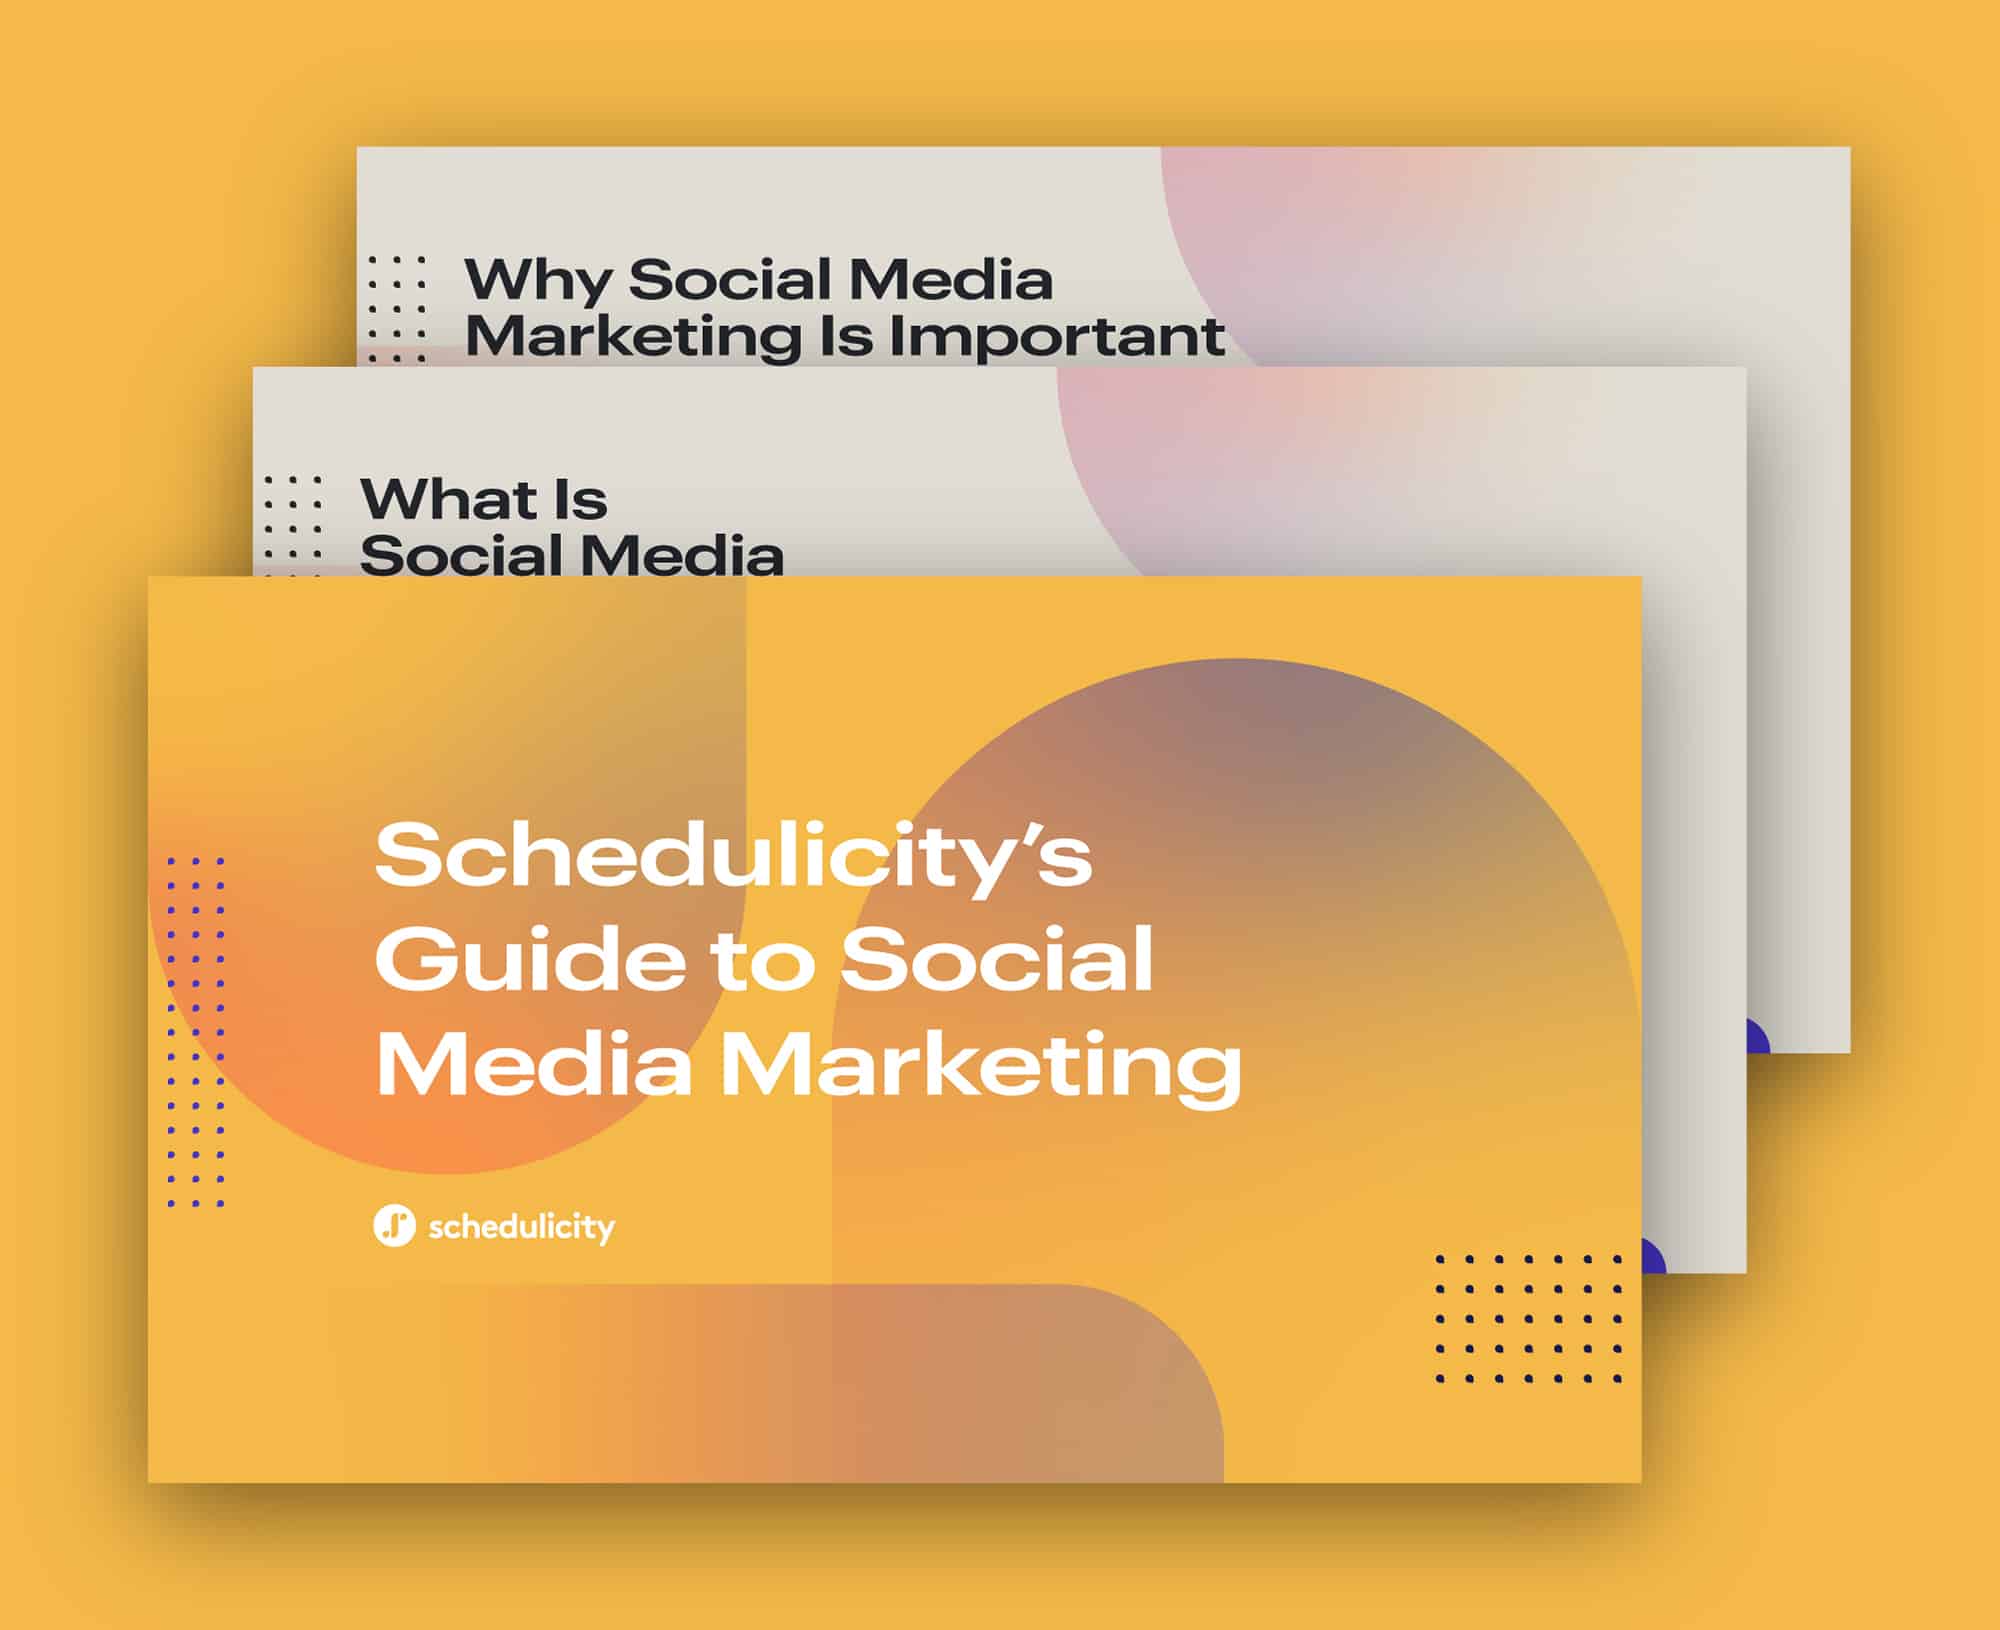 Schedulicity's Guide to Social Media Marketing